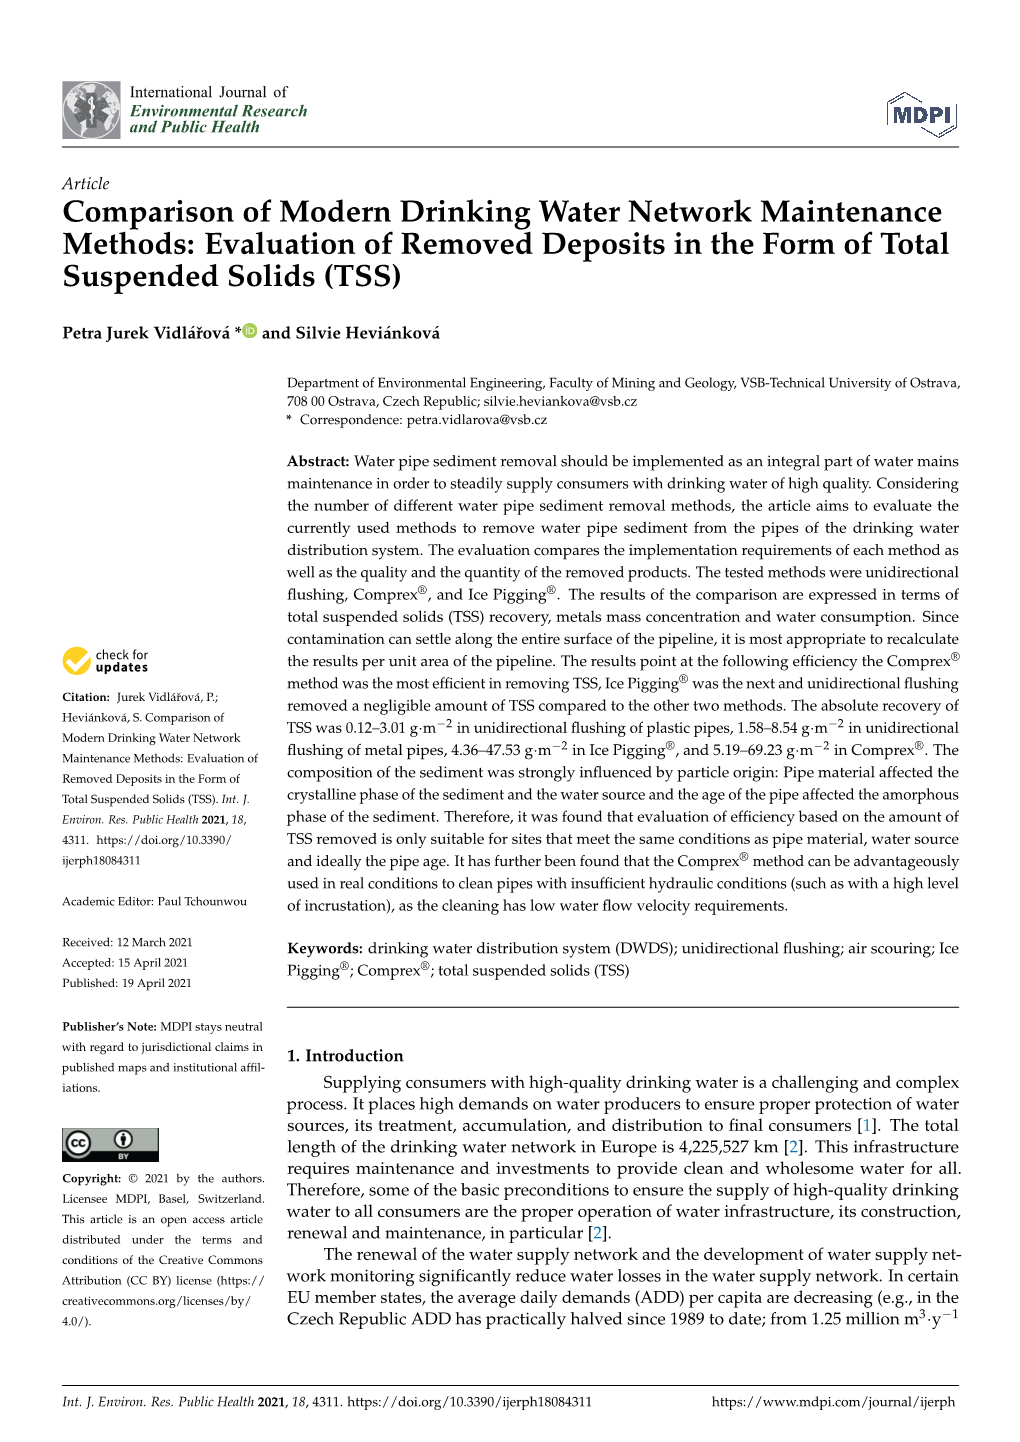 Comparison of Modern Drinking Water Network Maintenance Methods: Evaluation of Removed Deposits in the Form of Total Suspended Solids (TSS)